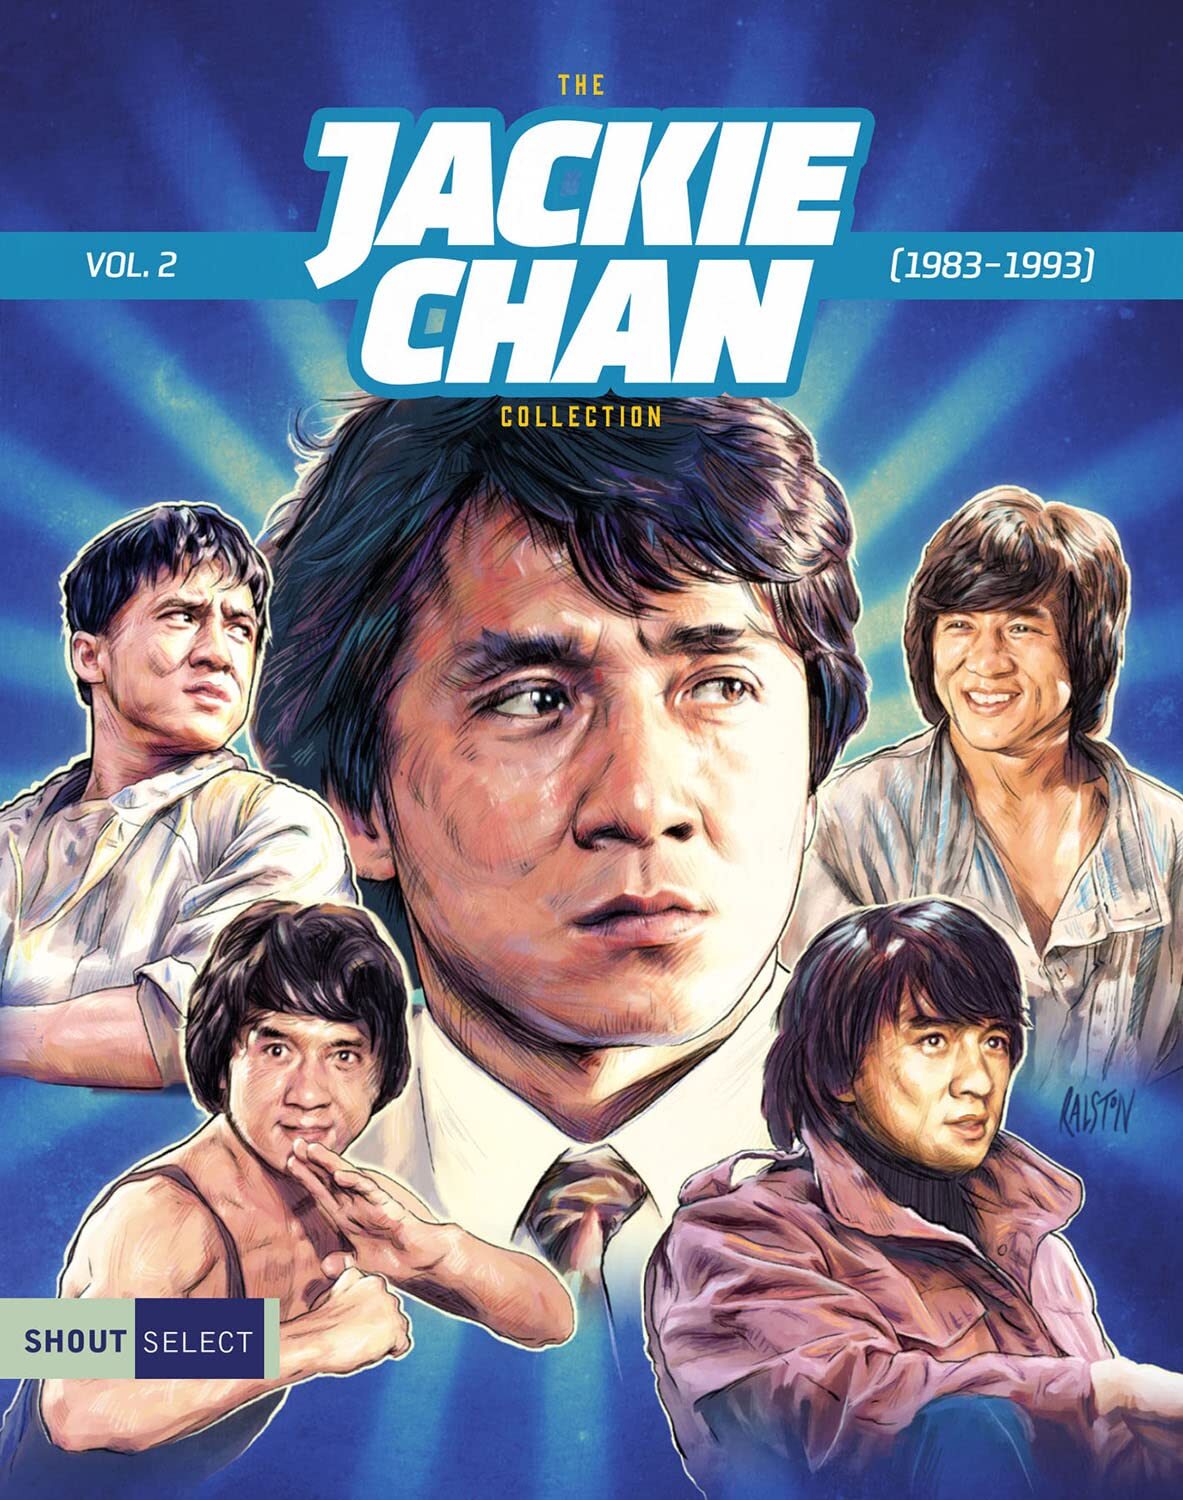 THE JACKIE CHAN COLLECTION VOLUME 2 BLU-RAY